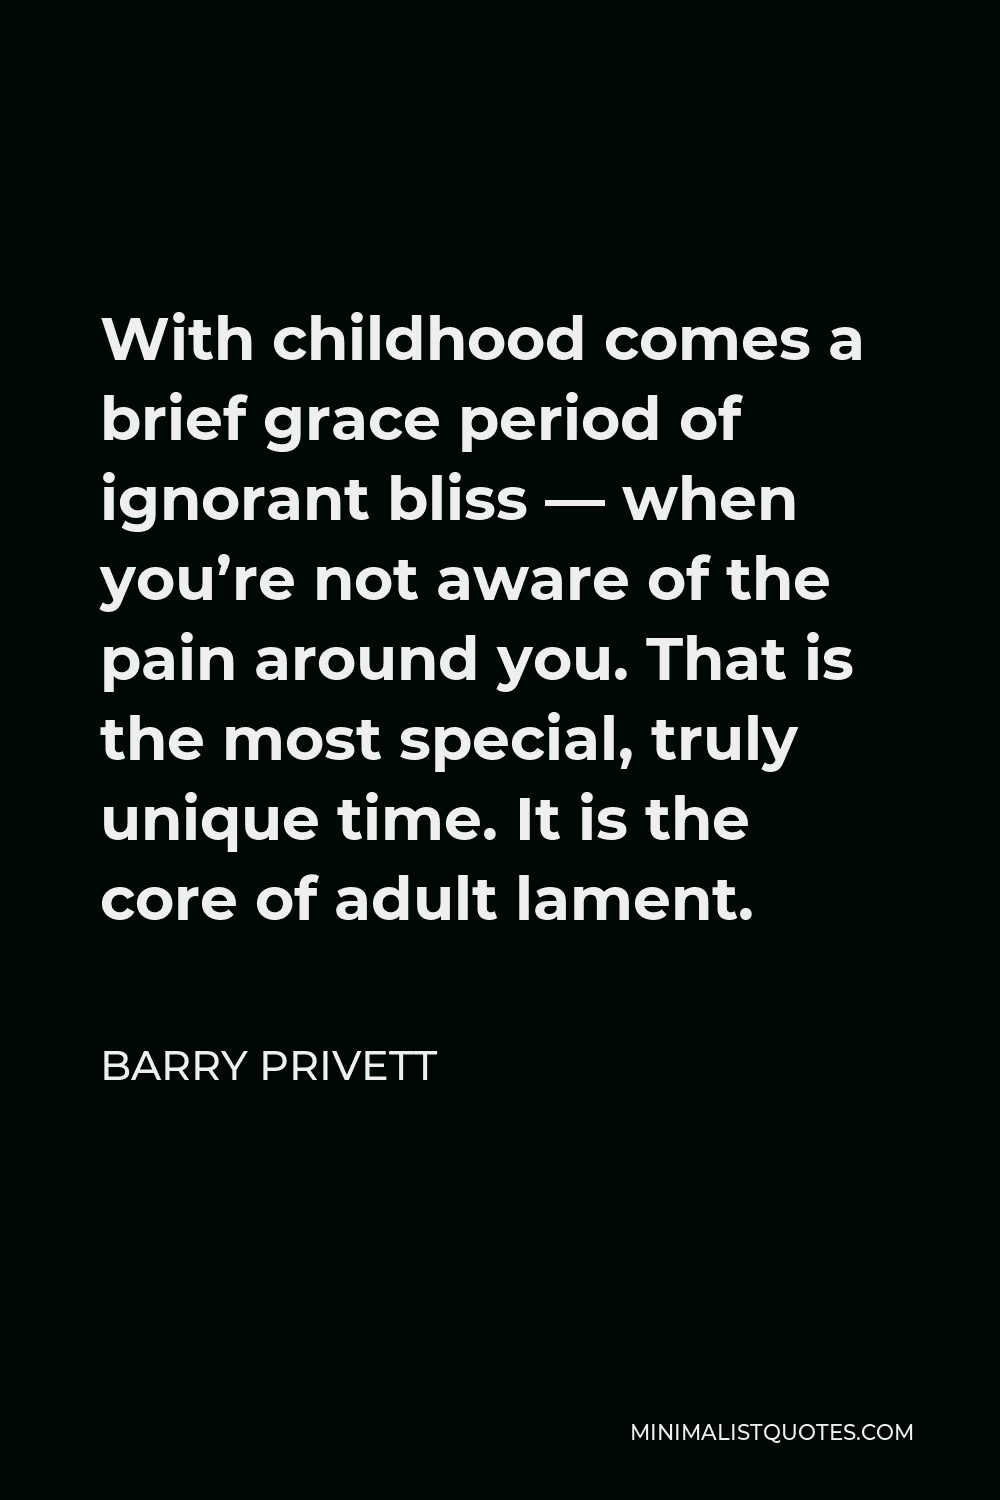 Barry Privett Quote - With childhood comes a brief grace period of ignorant bliss — when you’re not aware of the pain around you. That is the most special, truly unique time. It is the core of adult lament.